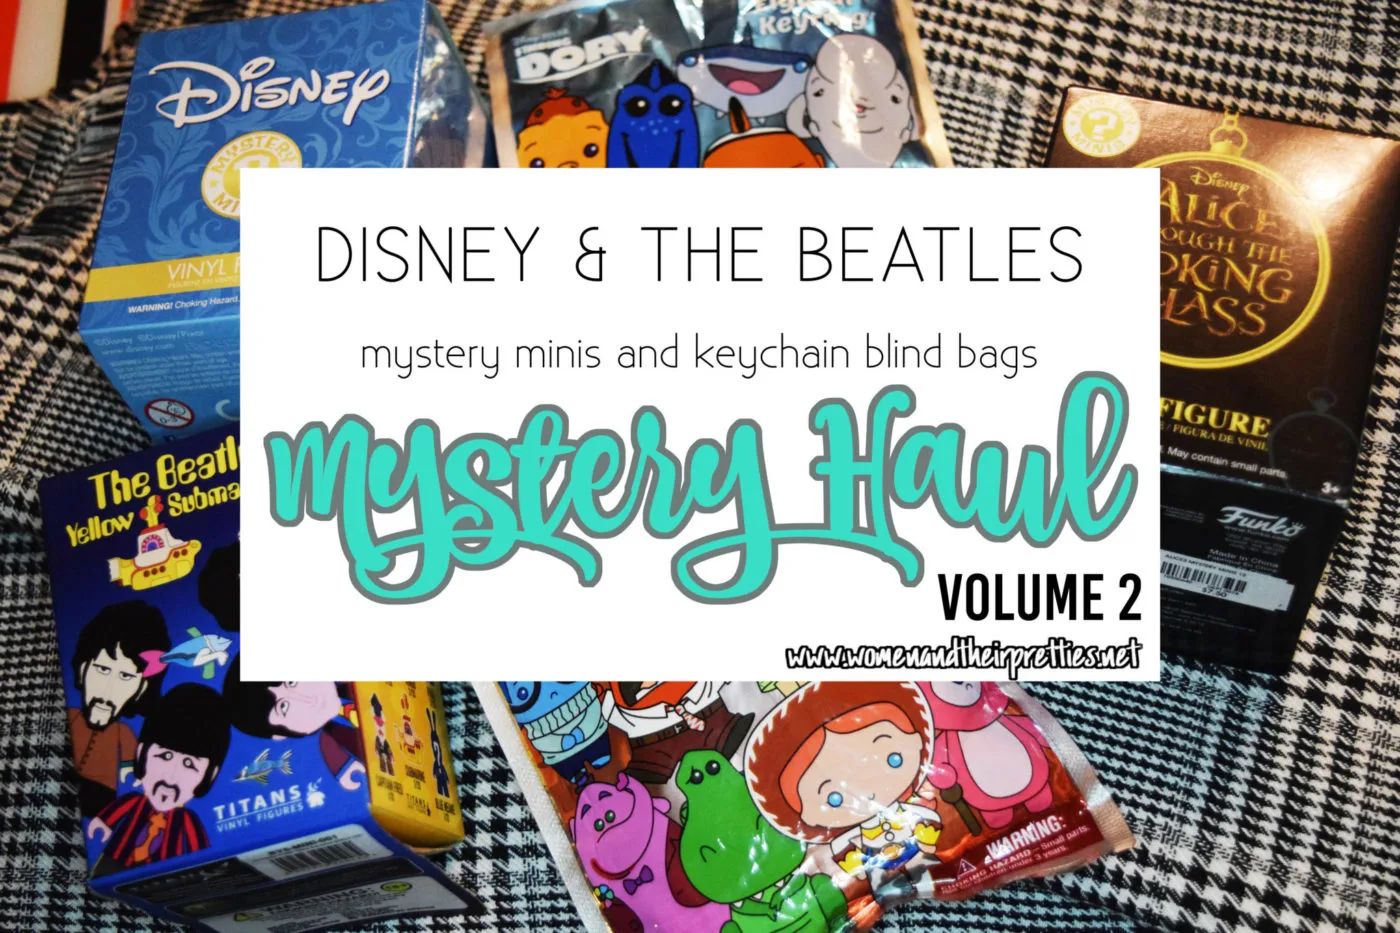 Check out my HUGE Mystery haul - we are reveal Disney Mystery Minis, The Beatles Yellow Submarine minis, Finding Dory & Inside Out Blind Bags, and an Alice Through The Looking Glass mystery mini #Funko #Geek